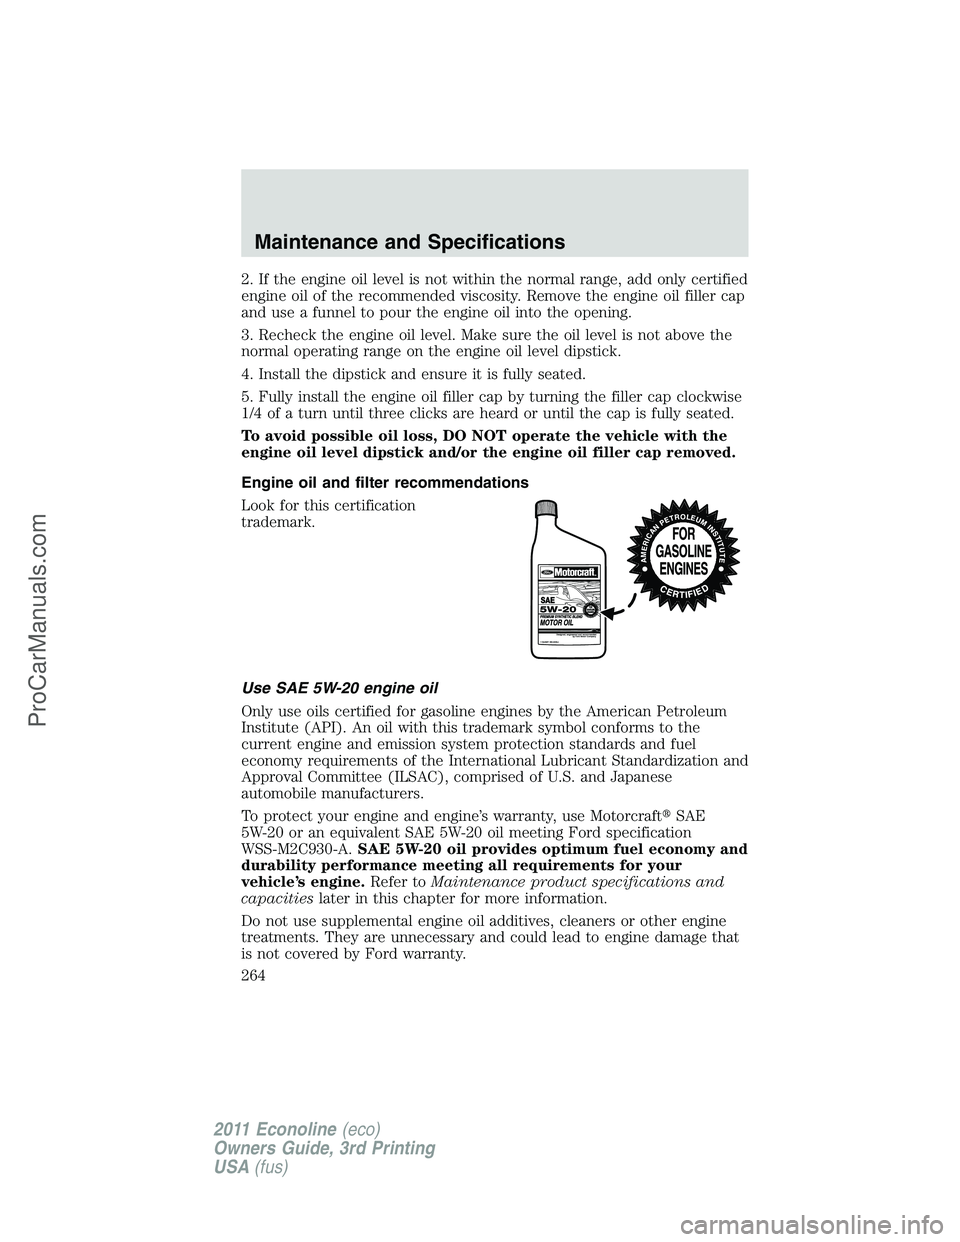 FORD E-450 2011  Owners Manual 2. If the engine oil level is not within the normal range, add only certified
engine oil of the recommended viscosity. Remove the engine oil filler cap
and use a funnel to pour the engine oil into the